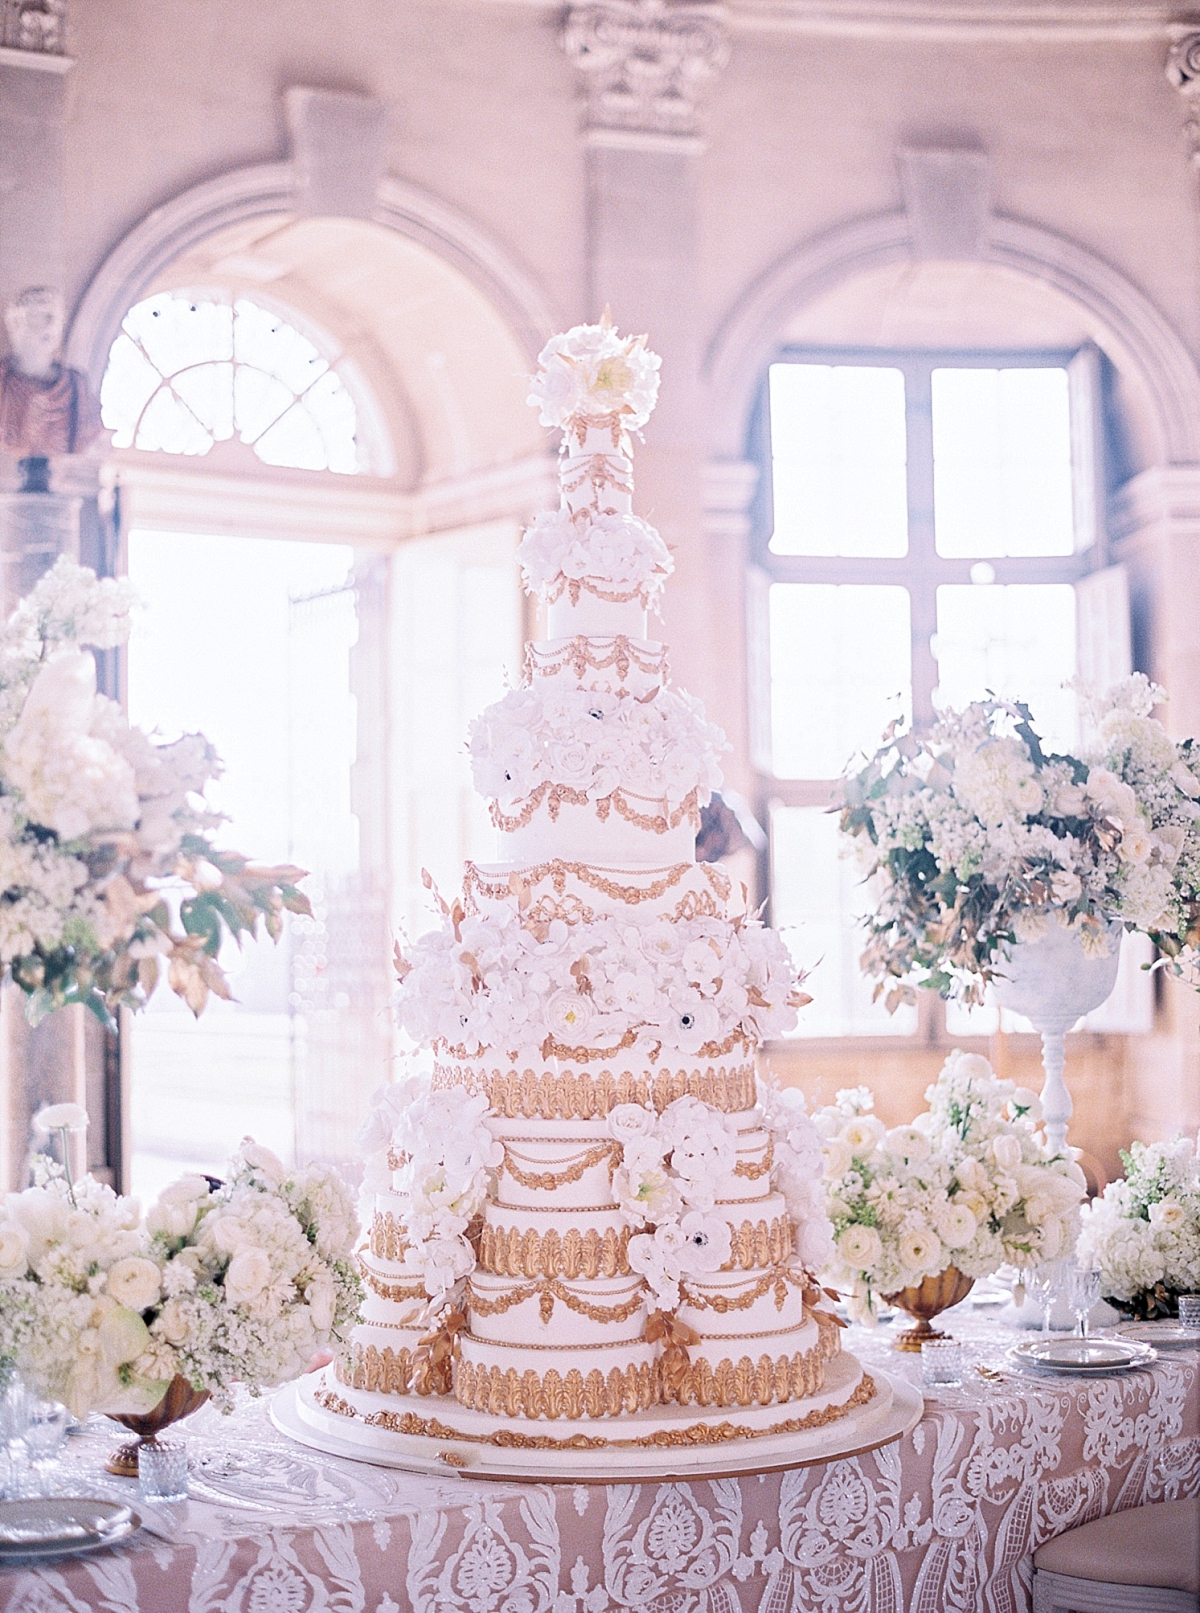 Wedding cake in the ceremony room of the chateau de vaux le vicomte 